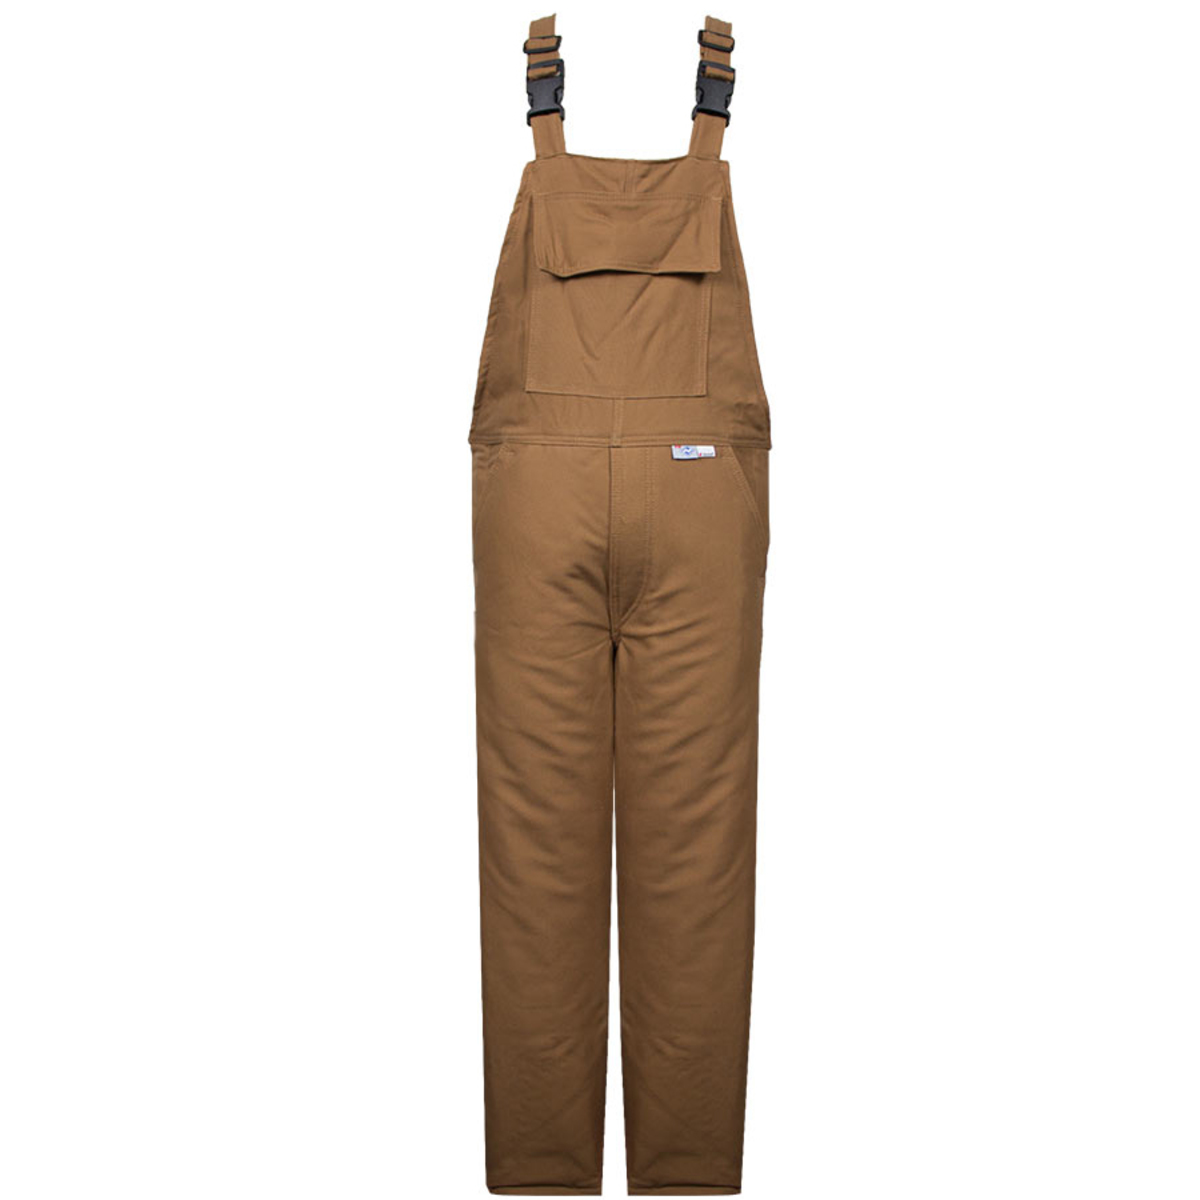 National Safety Apparel 3X Regular Brown Westex UltraSoft® Duck/DWR Flame Resistant Bib Overall FR Quilted Lining With Zipper Fr